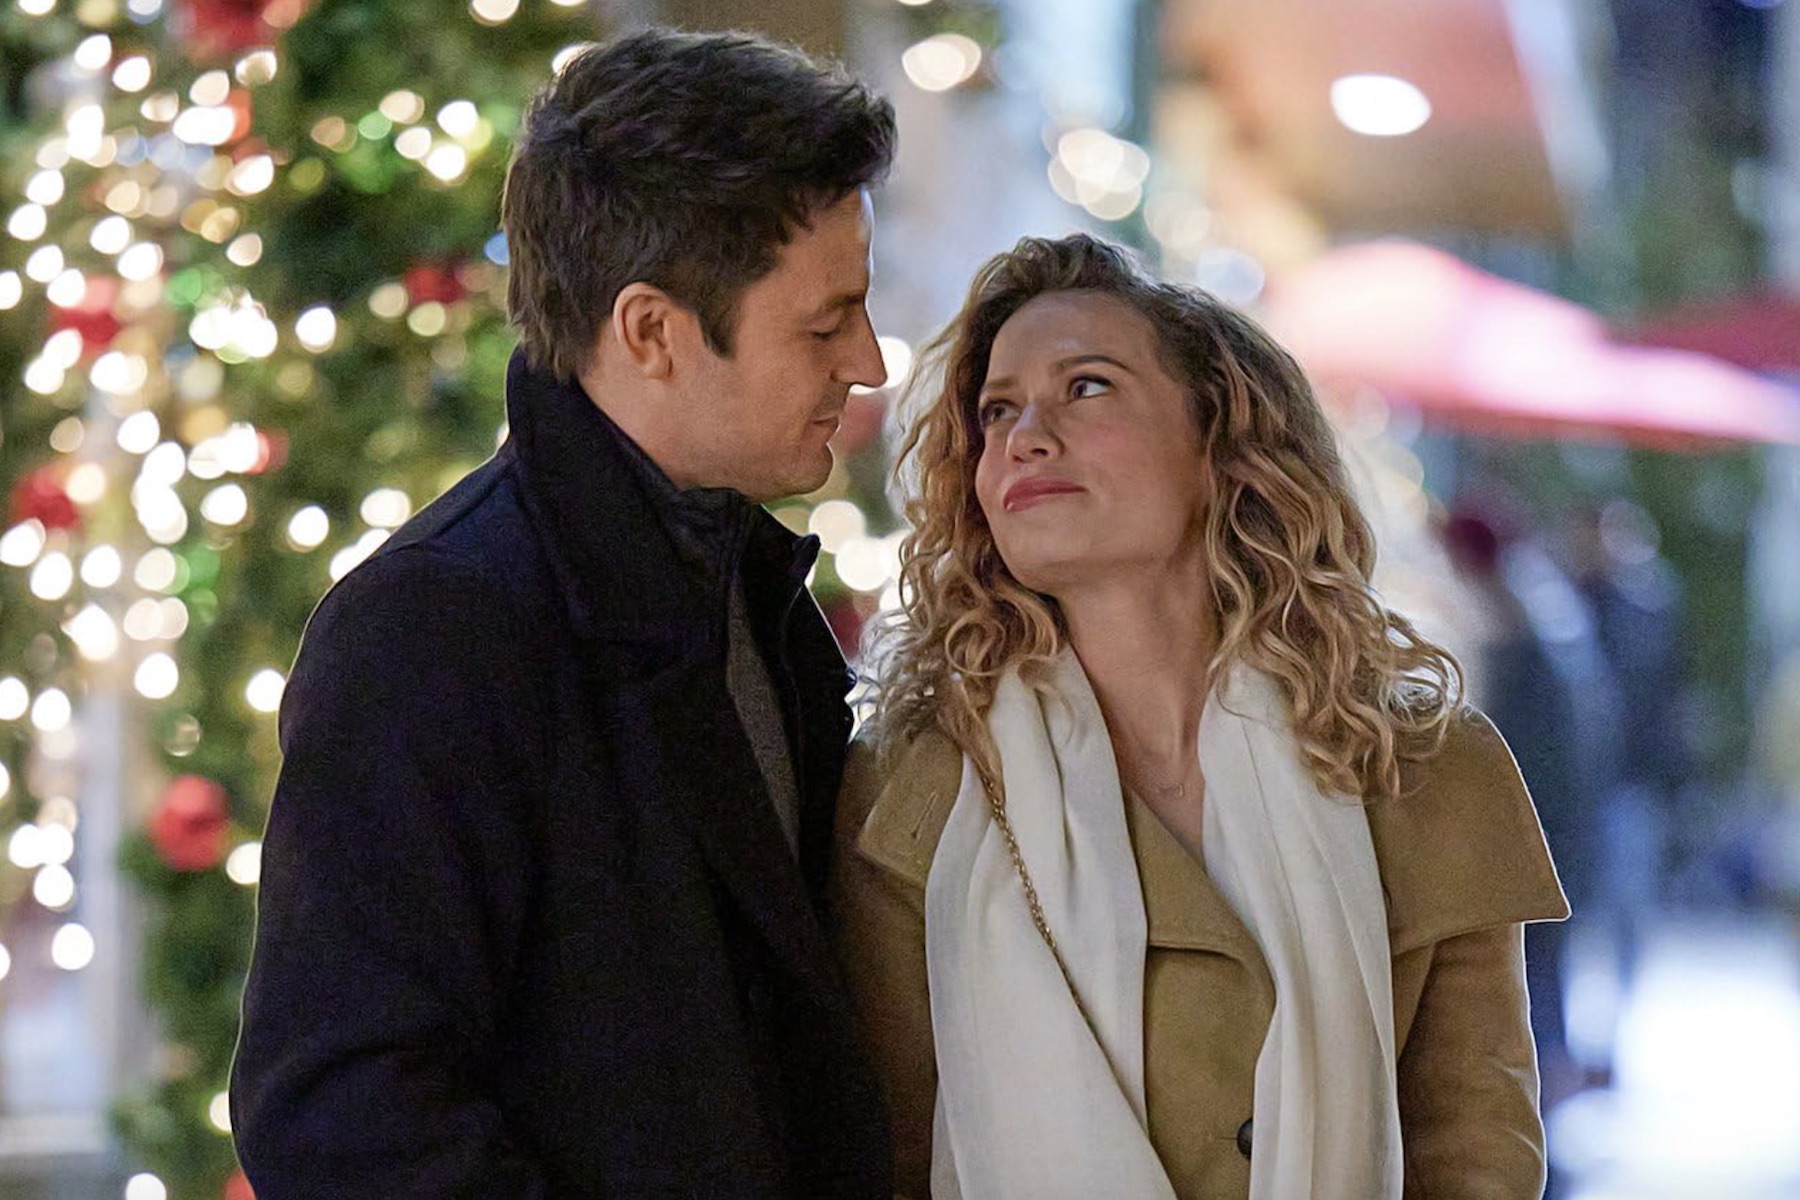 The best Christmas movies on Hallmark Channel right now